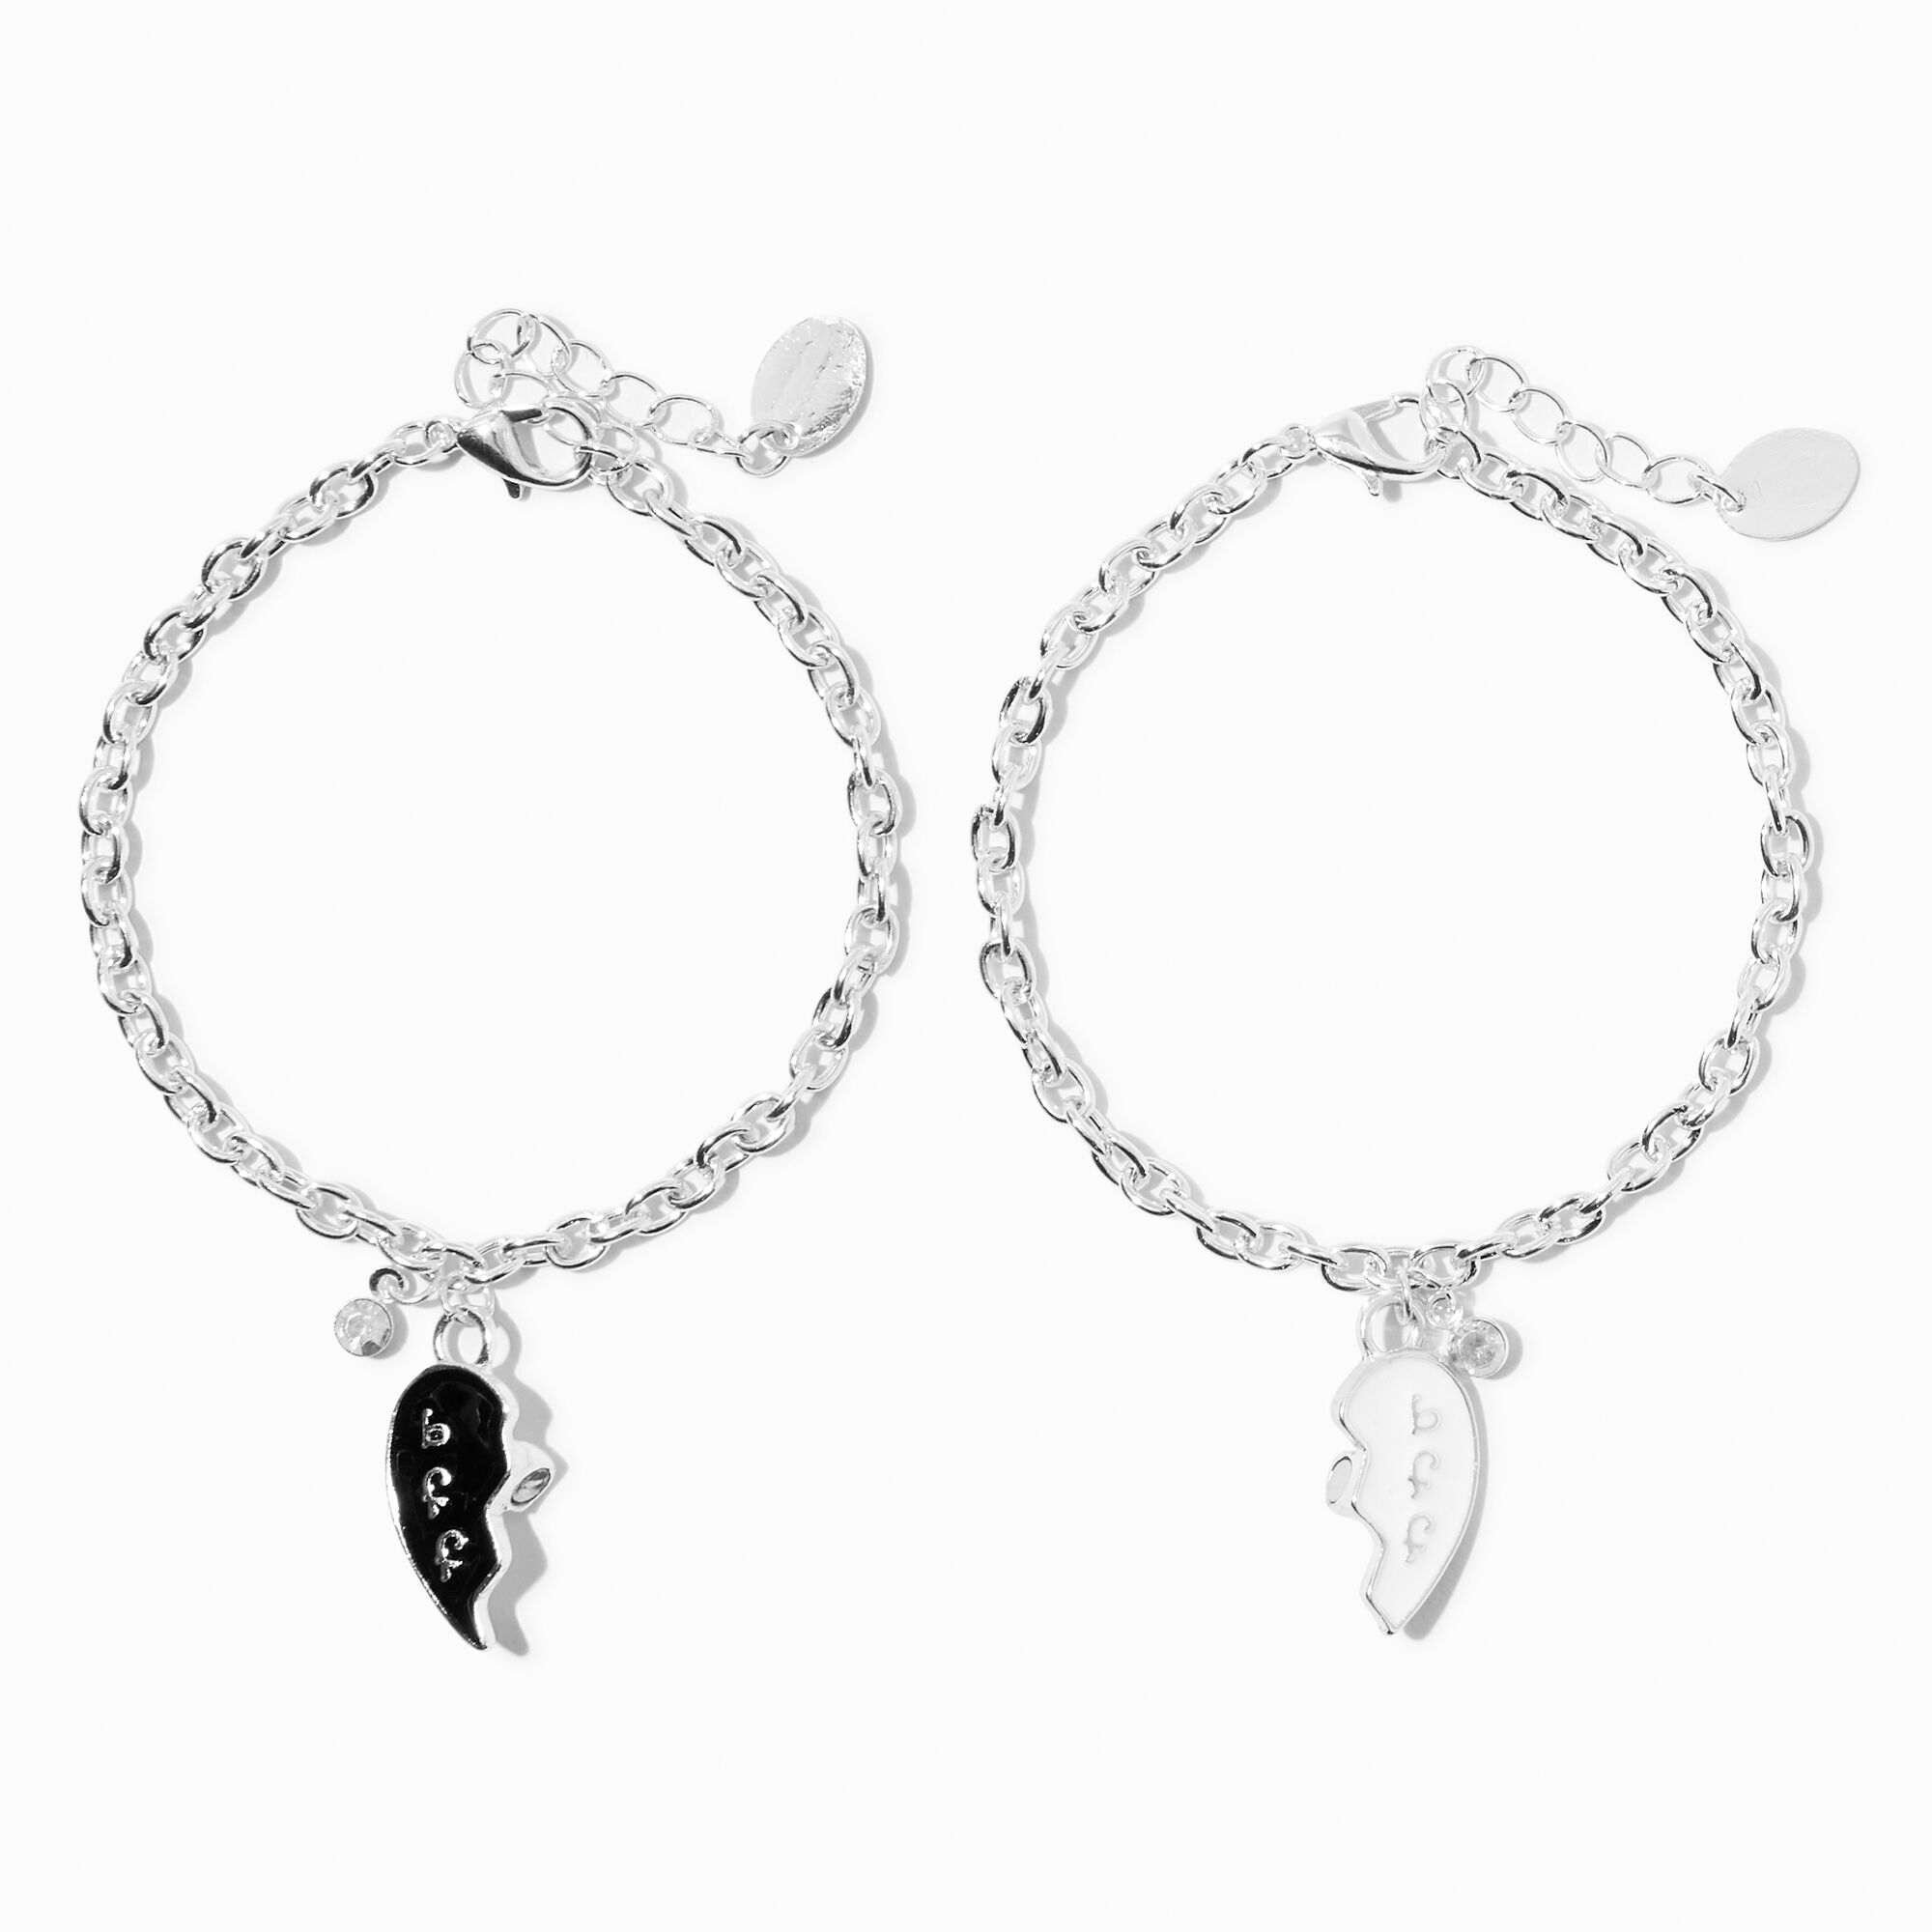 Besties Magnetic Charms, Cambrasine